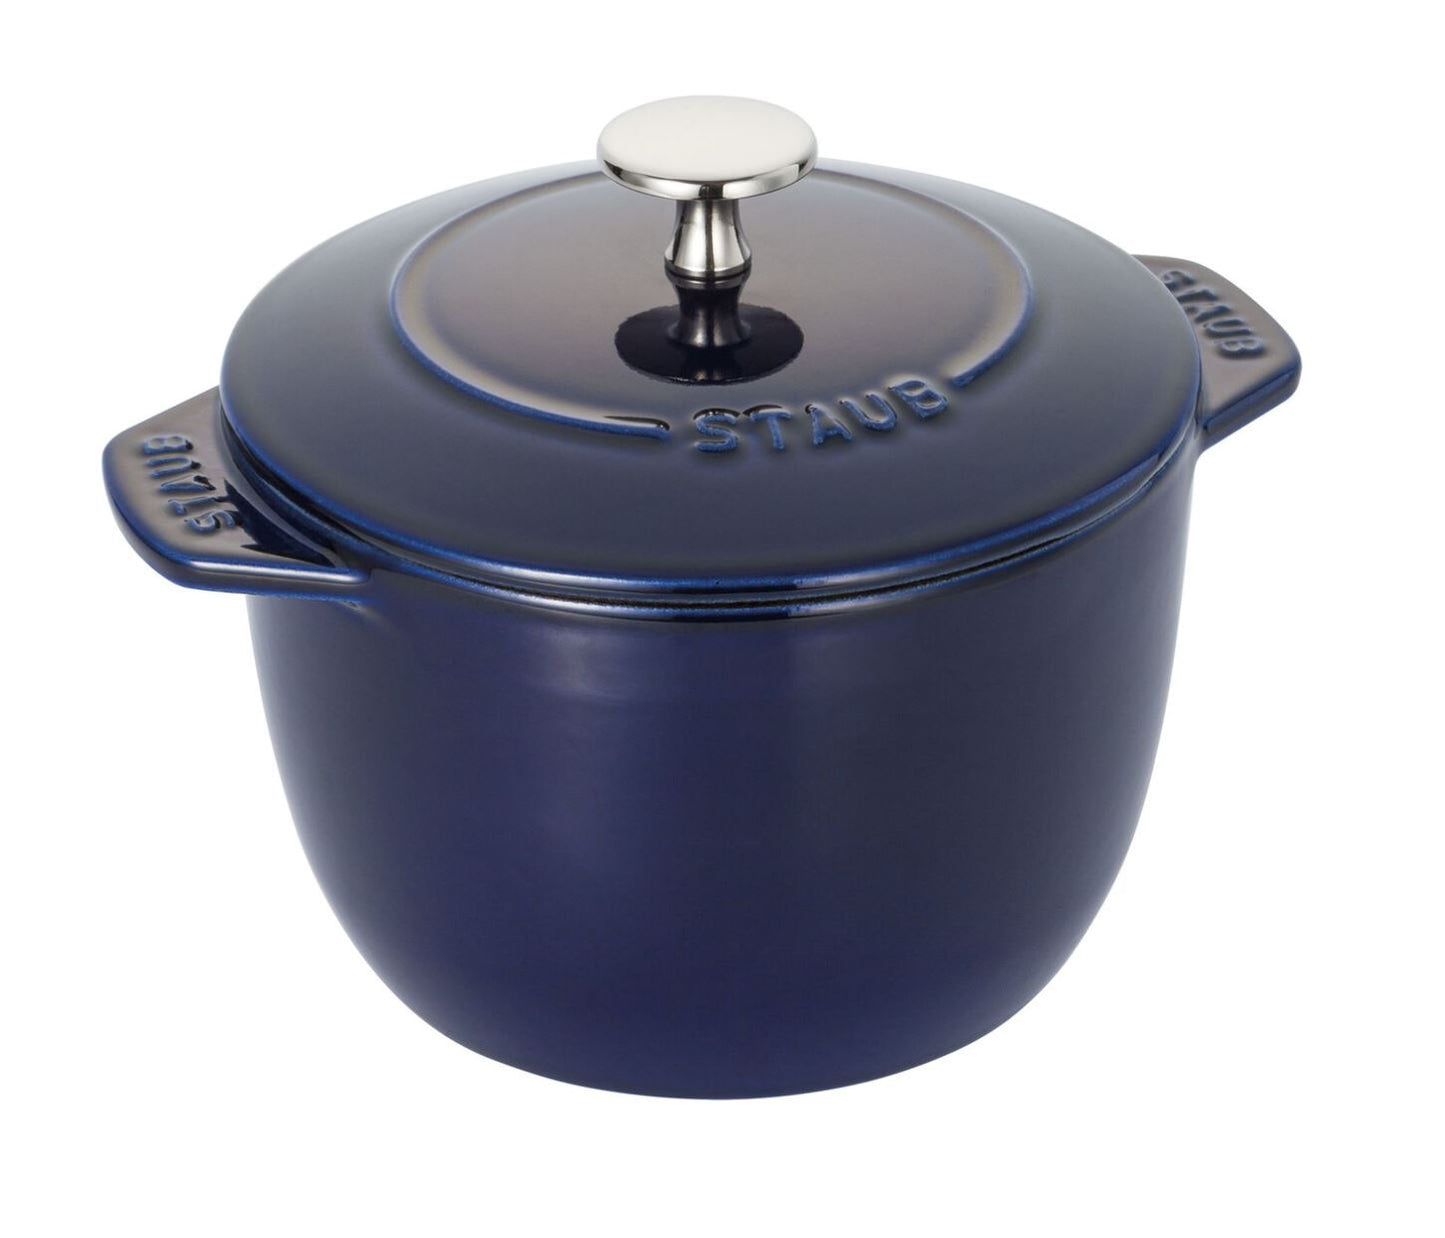 Petite French Oven and Rice Cooker, 1.5 Qt